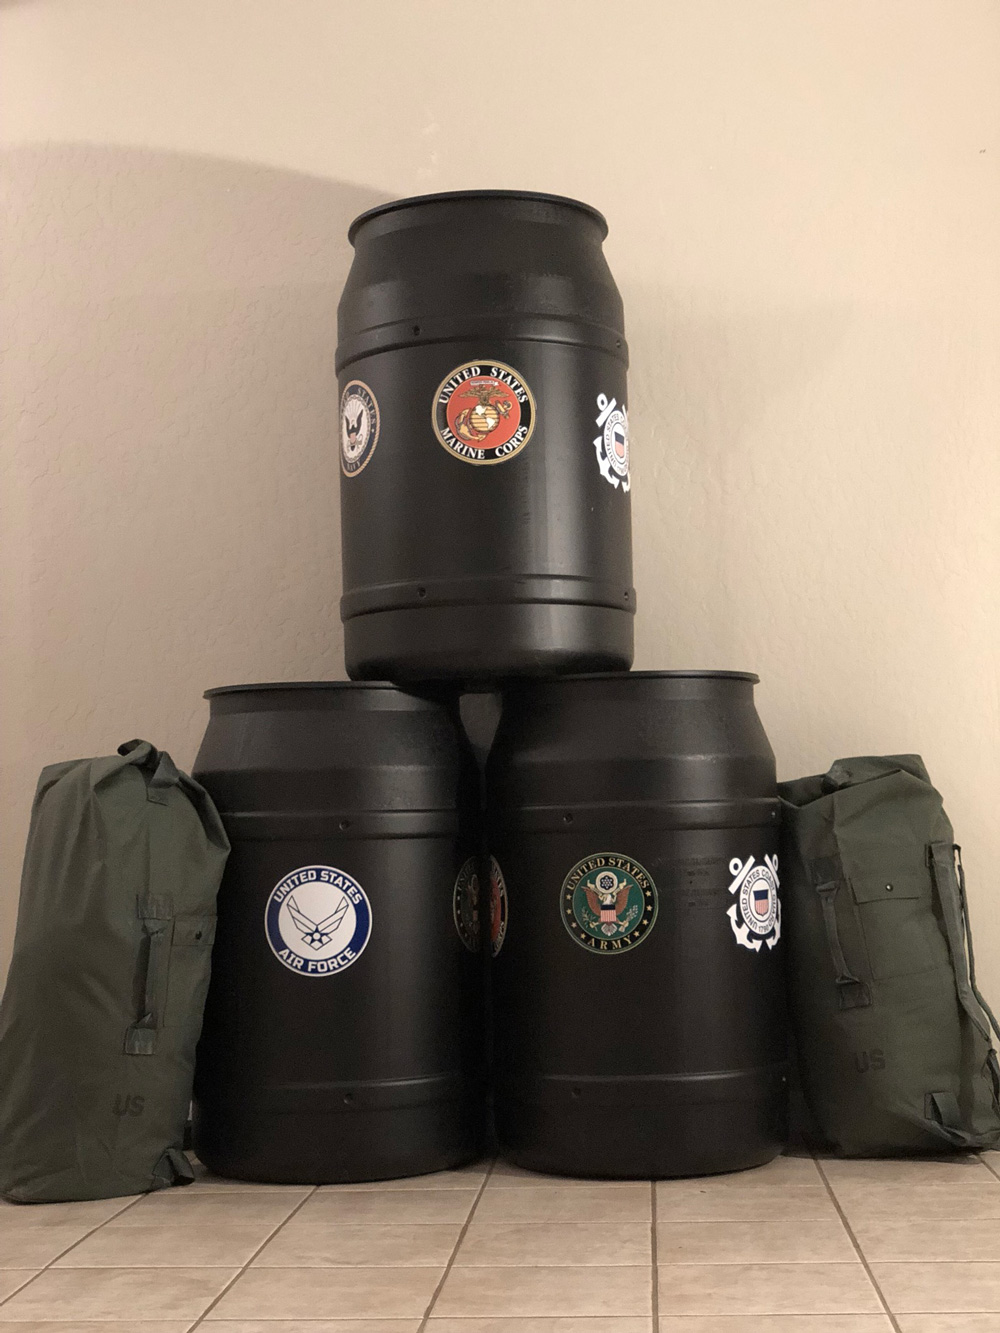 Donation collection barrels created by Tracey's organization Opertion Good to Go. The barrels are placed in businesses in order to collect supplies for veterans in need.